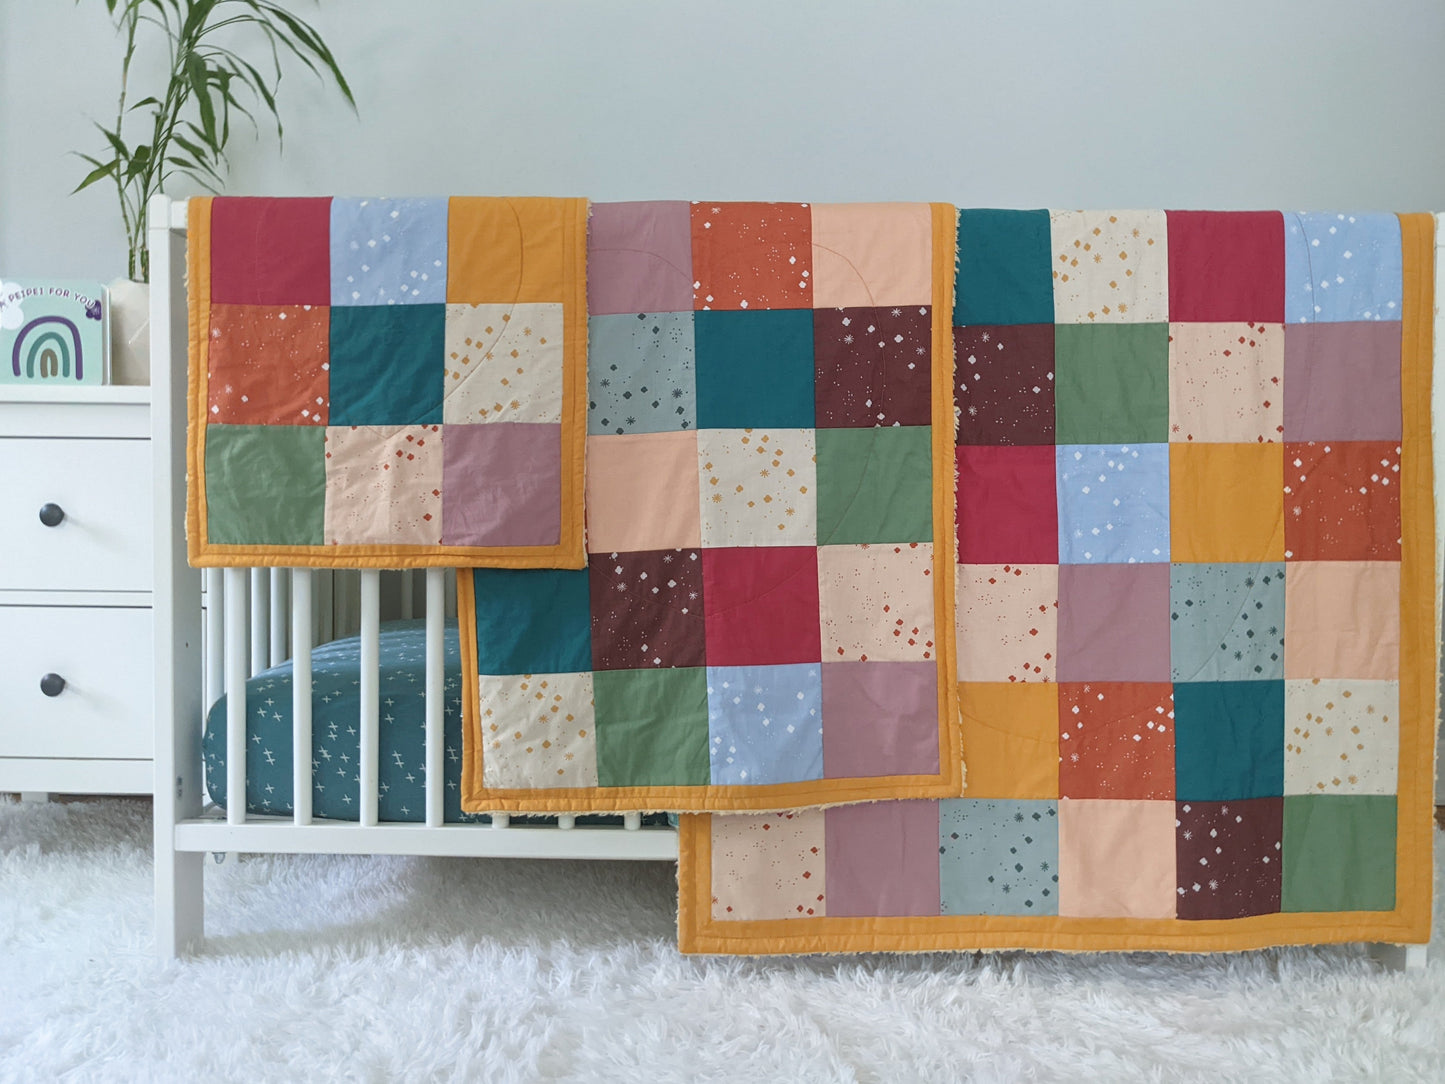 Baby Peipei 's organic patchwork quilts with pastel and earth tones. These patchwork quilt come in three sizes: crib, security blanket, and lovey. With 12 fabrics, these quilts are reminiscent of the Bai Jia Bei Chinese quilt tradition 